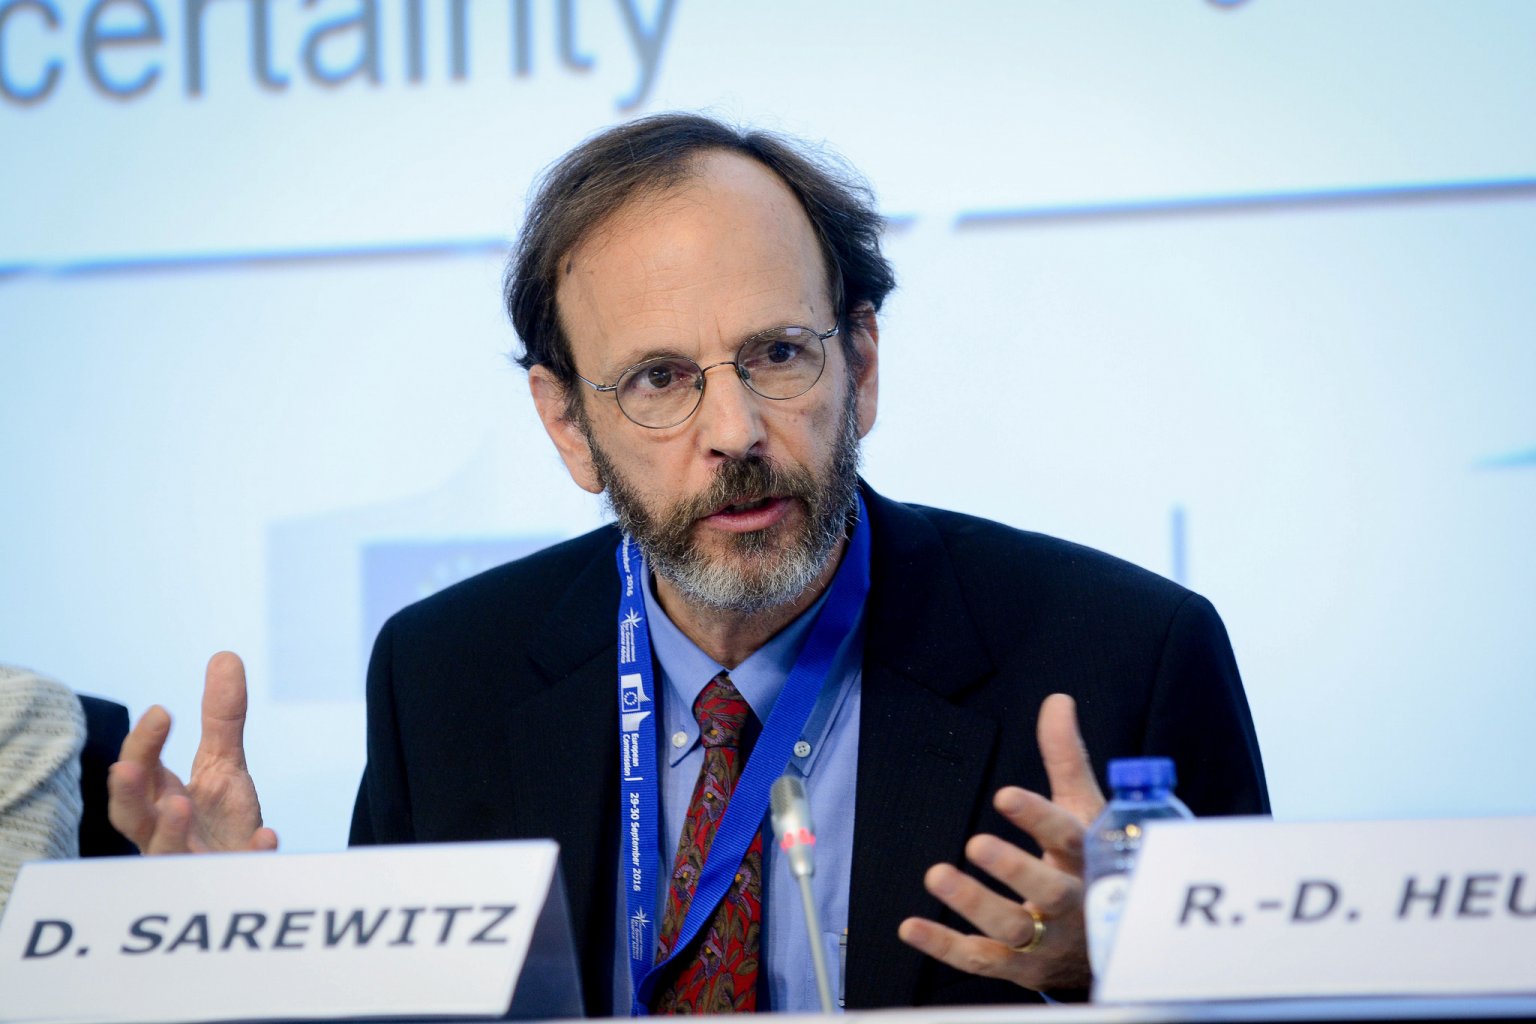 Q&A with Daniel Sarewitz: What is the role of science in a post-normal world?